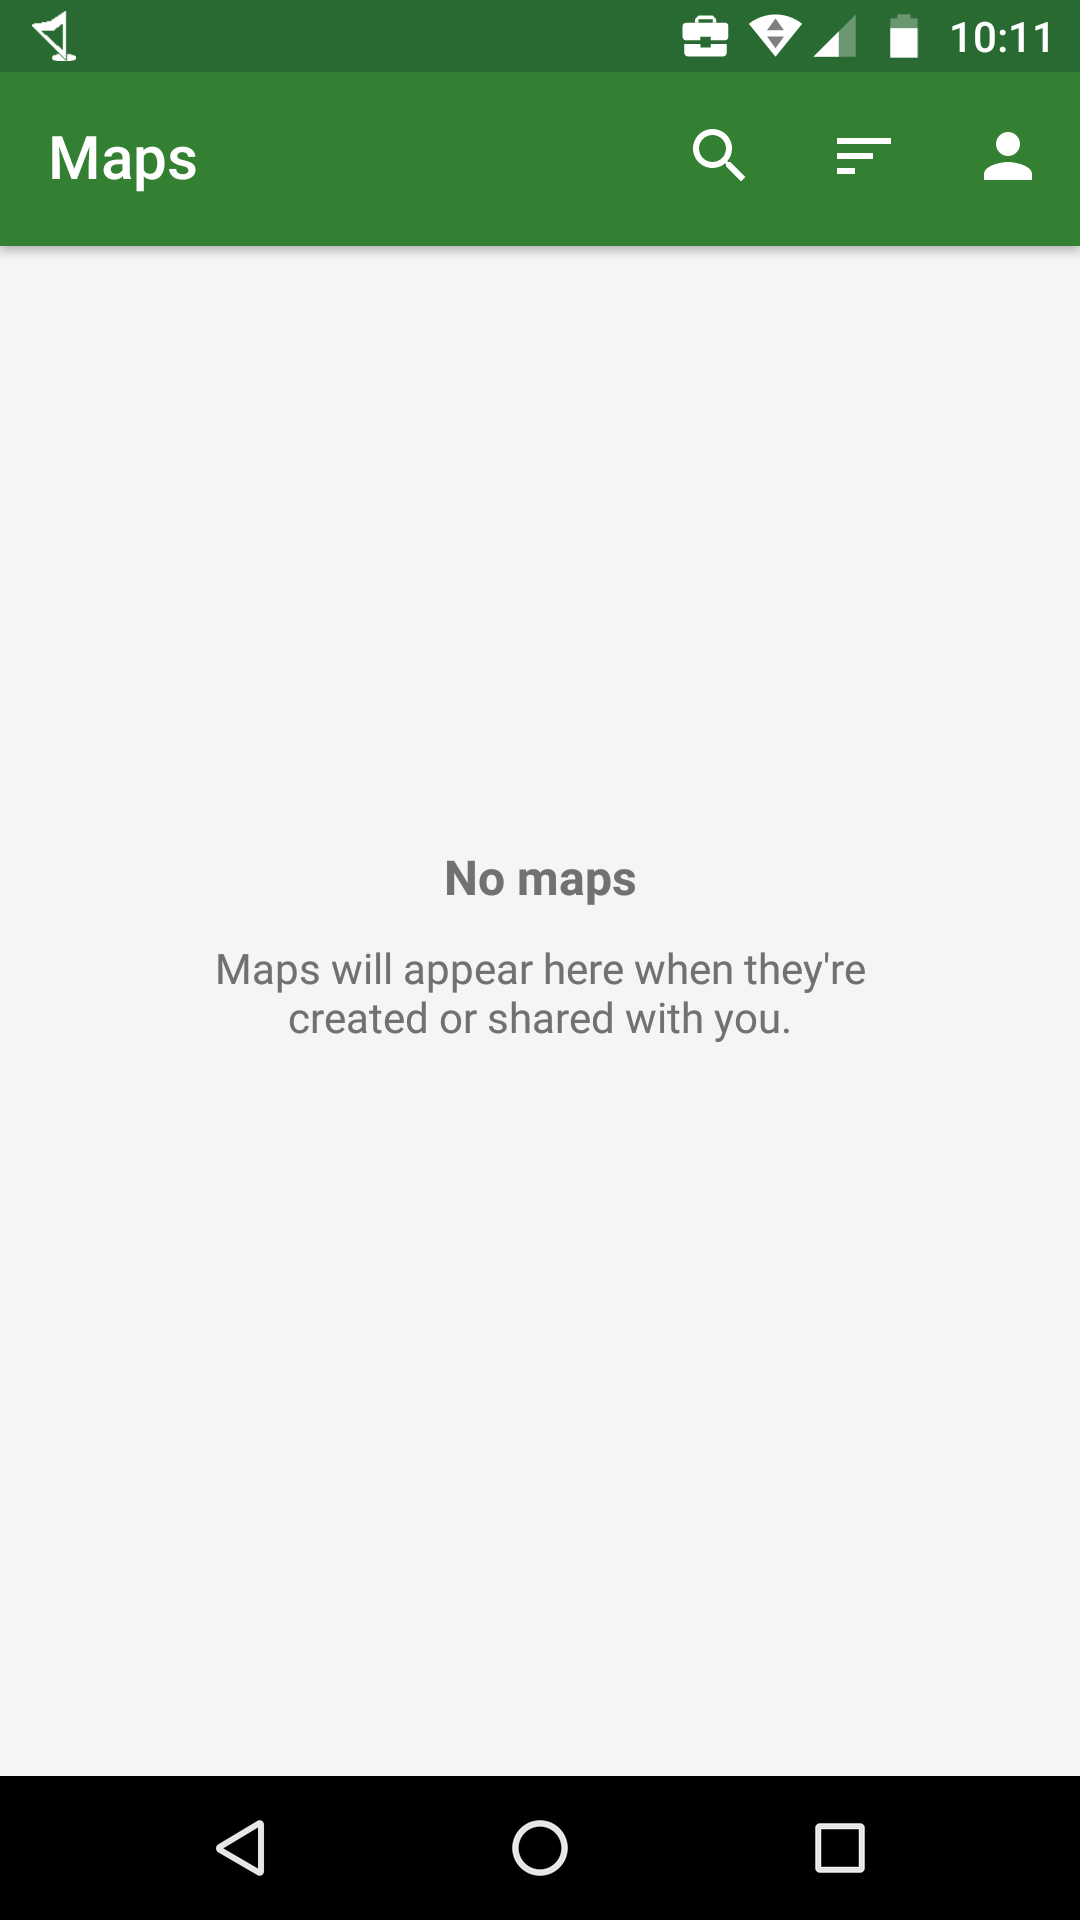 No maps appearing message in Android Explorer